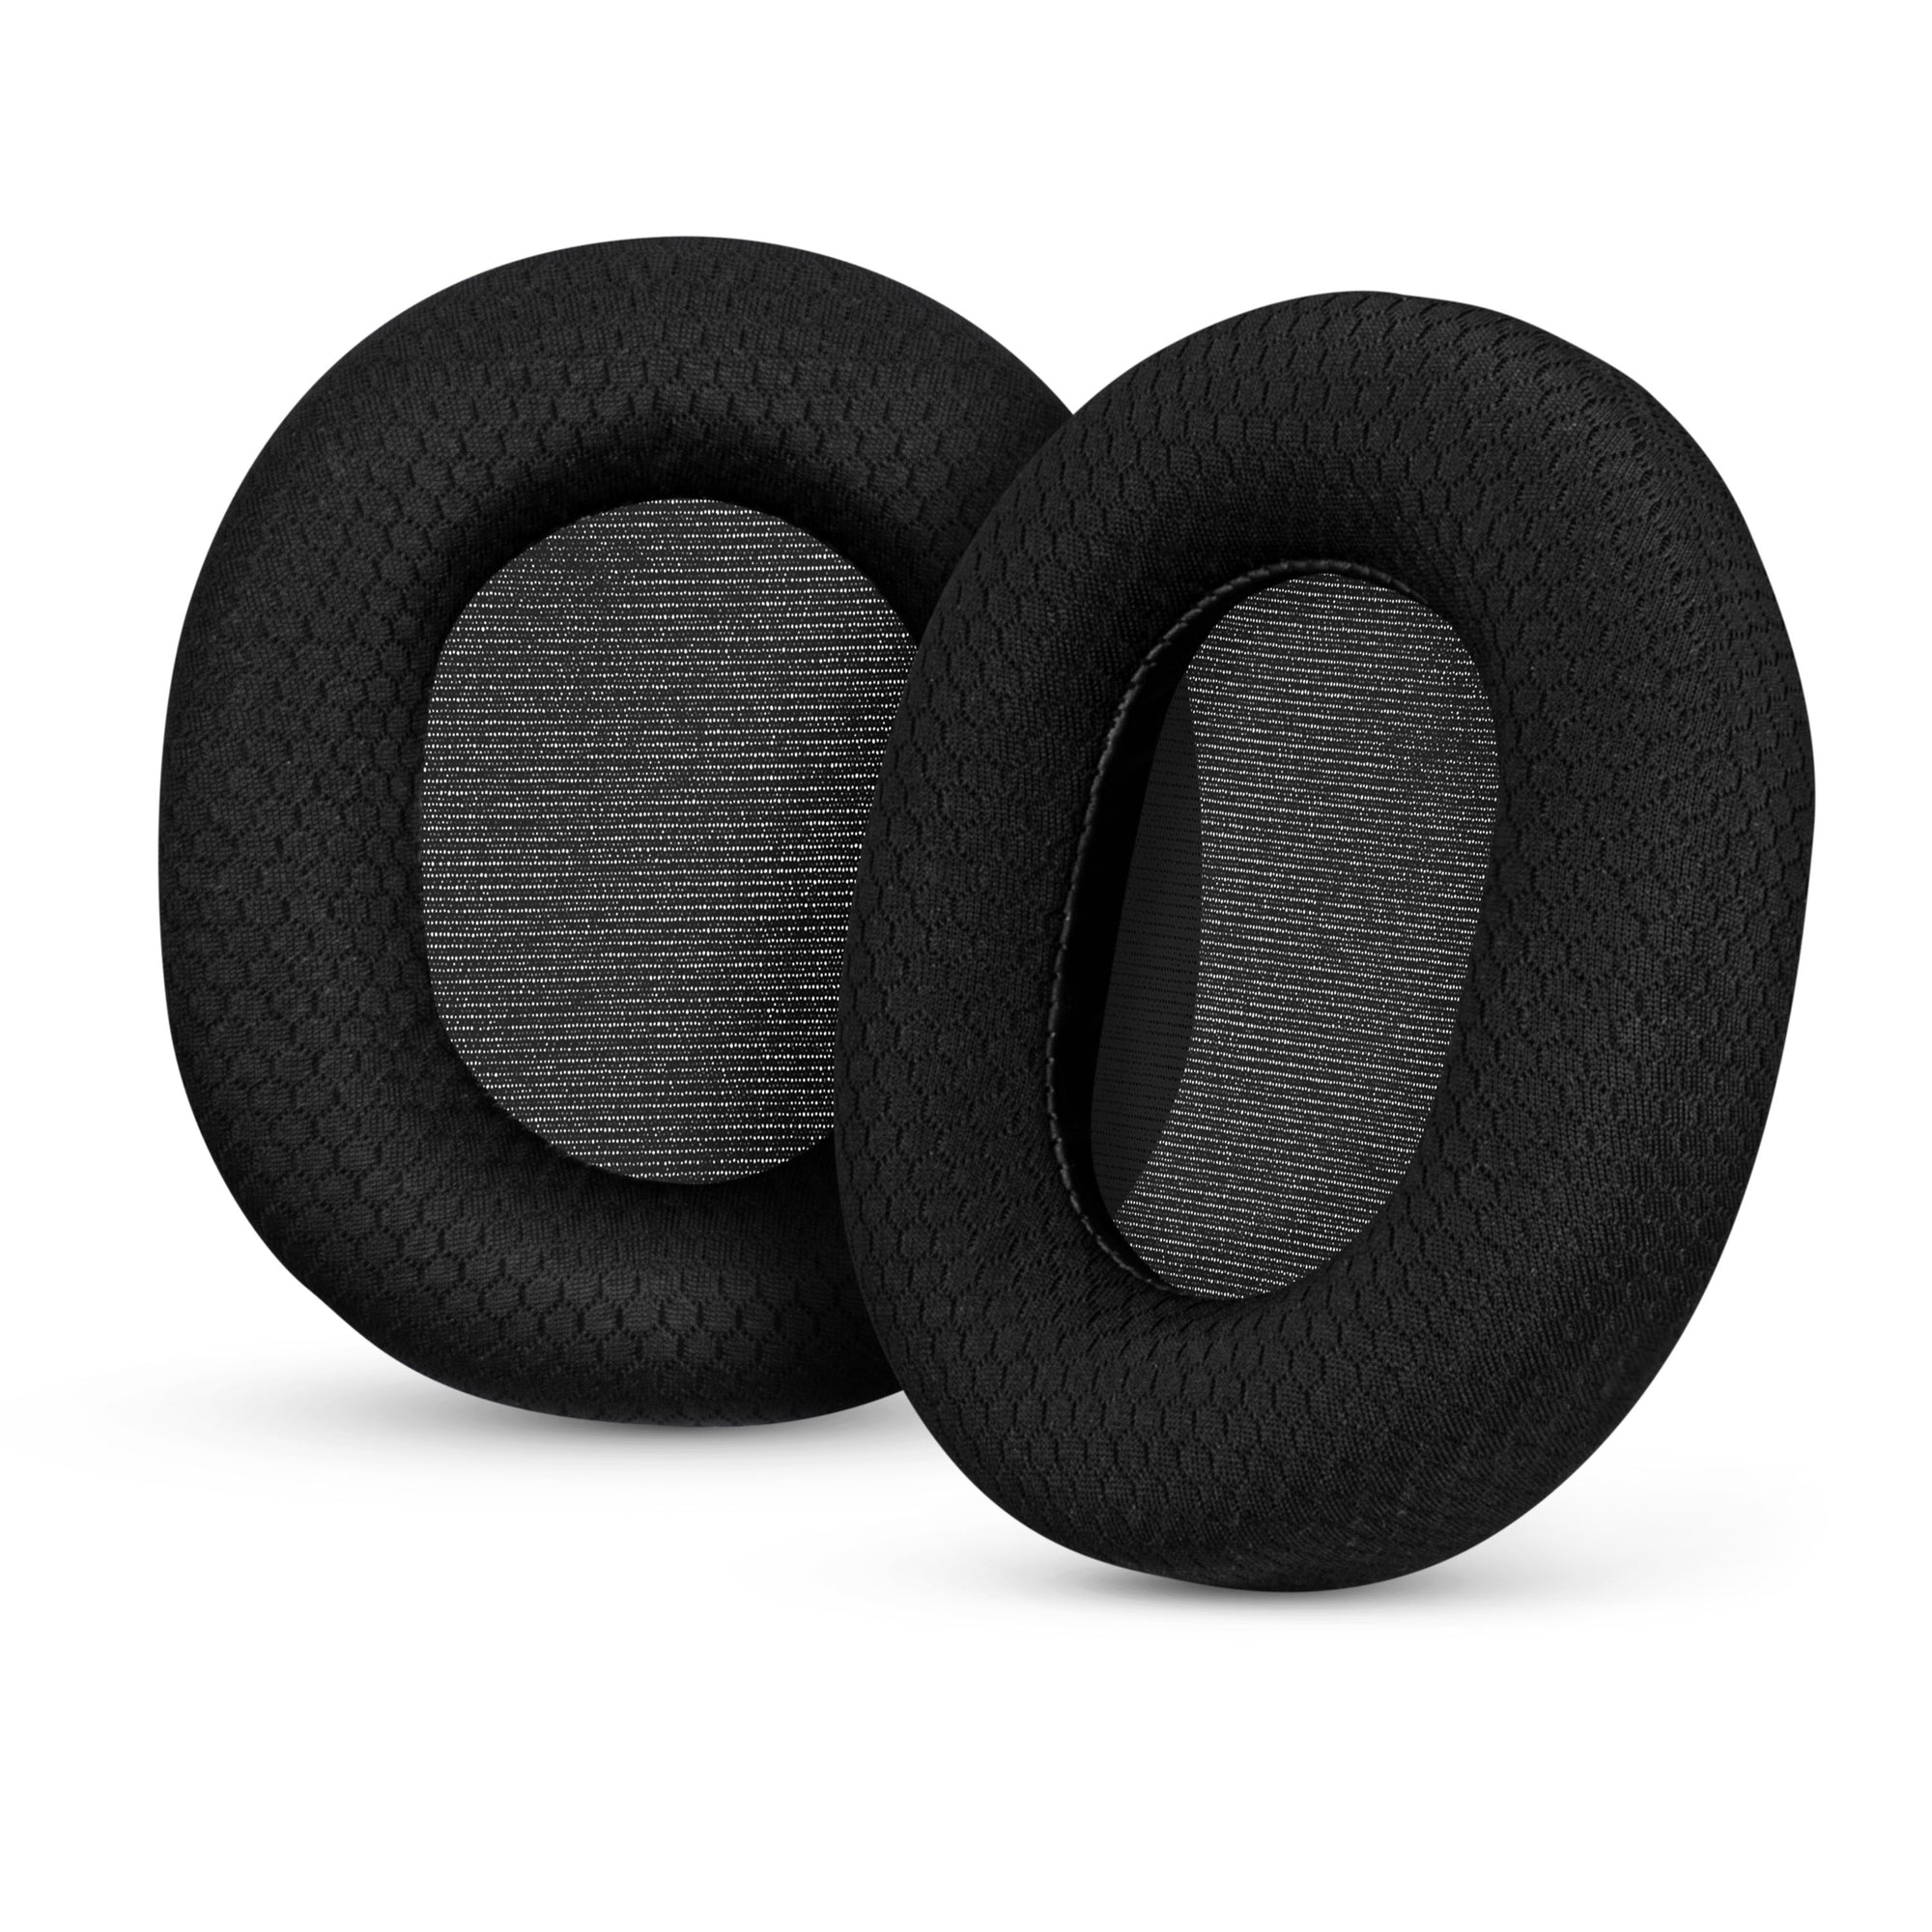 Replacement Earpads for Steelseries Arctis 1, 3, 5, 7, 9, PRO & PRIME Headsets, Soft Breathable fabric, Extra Comfort